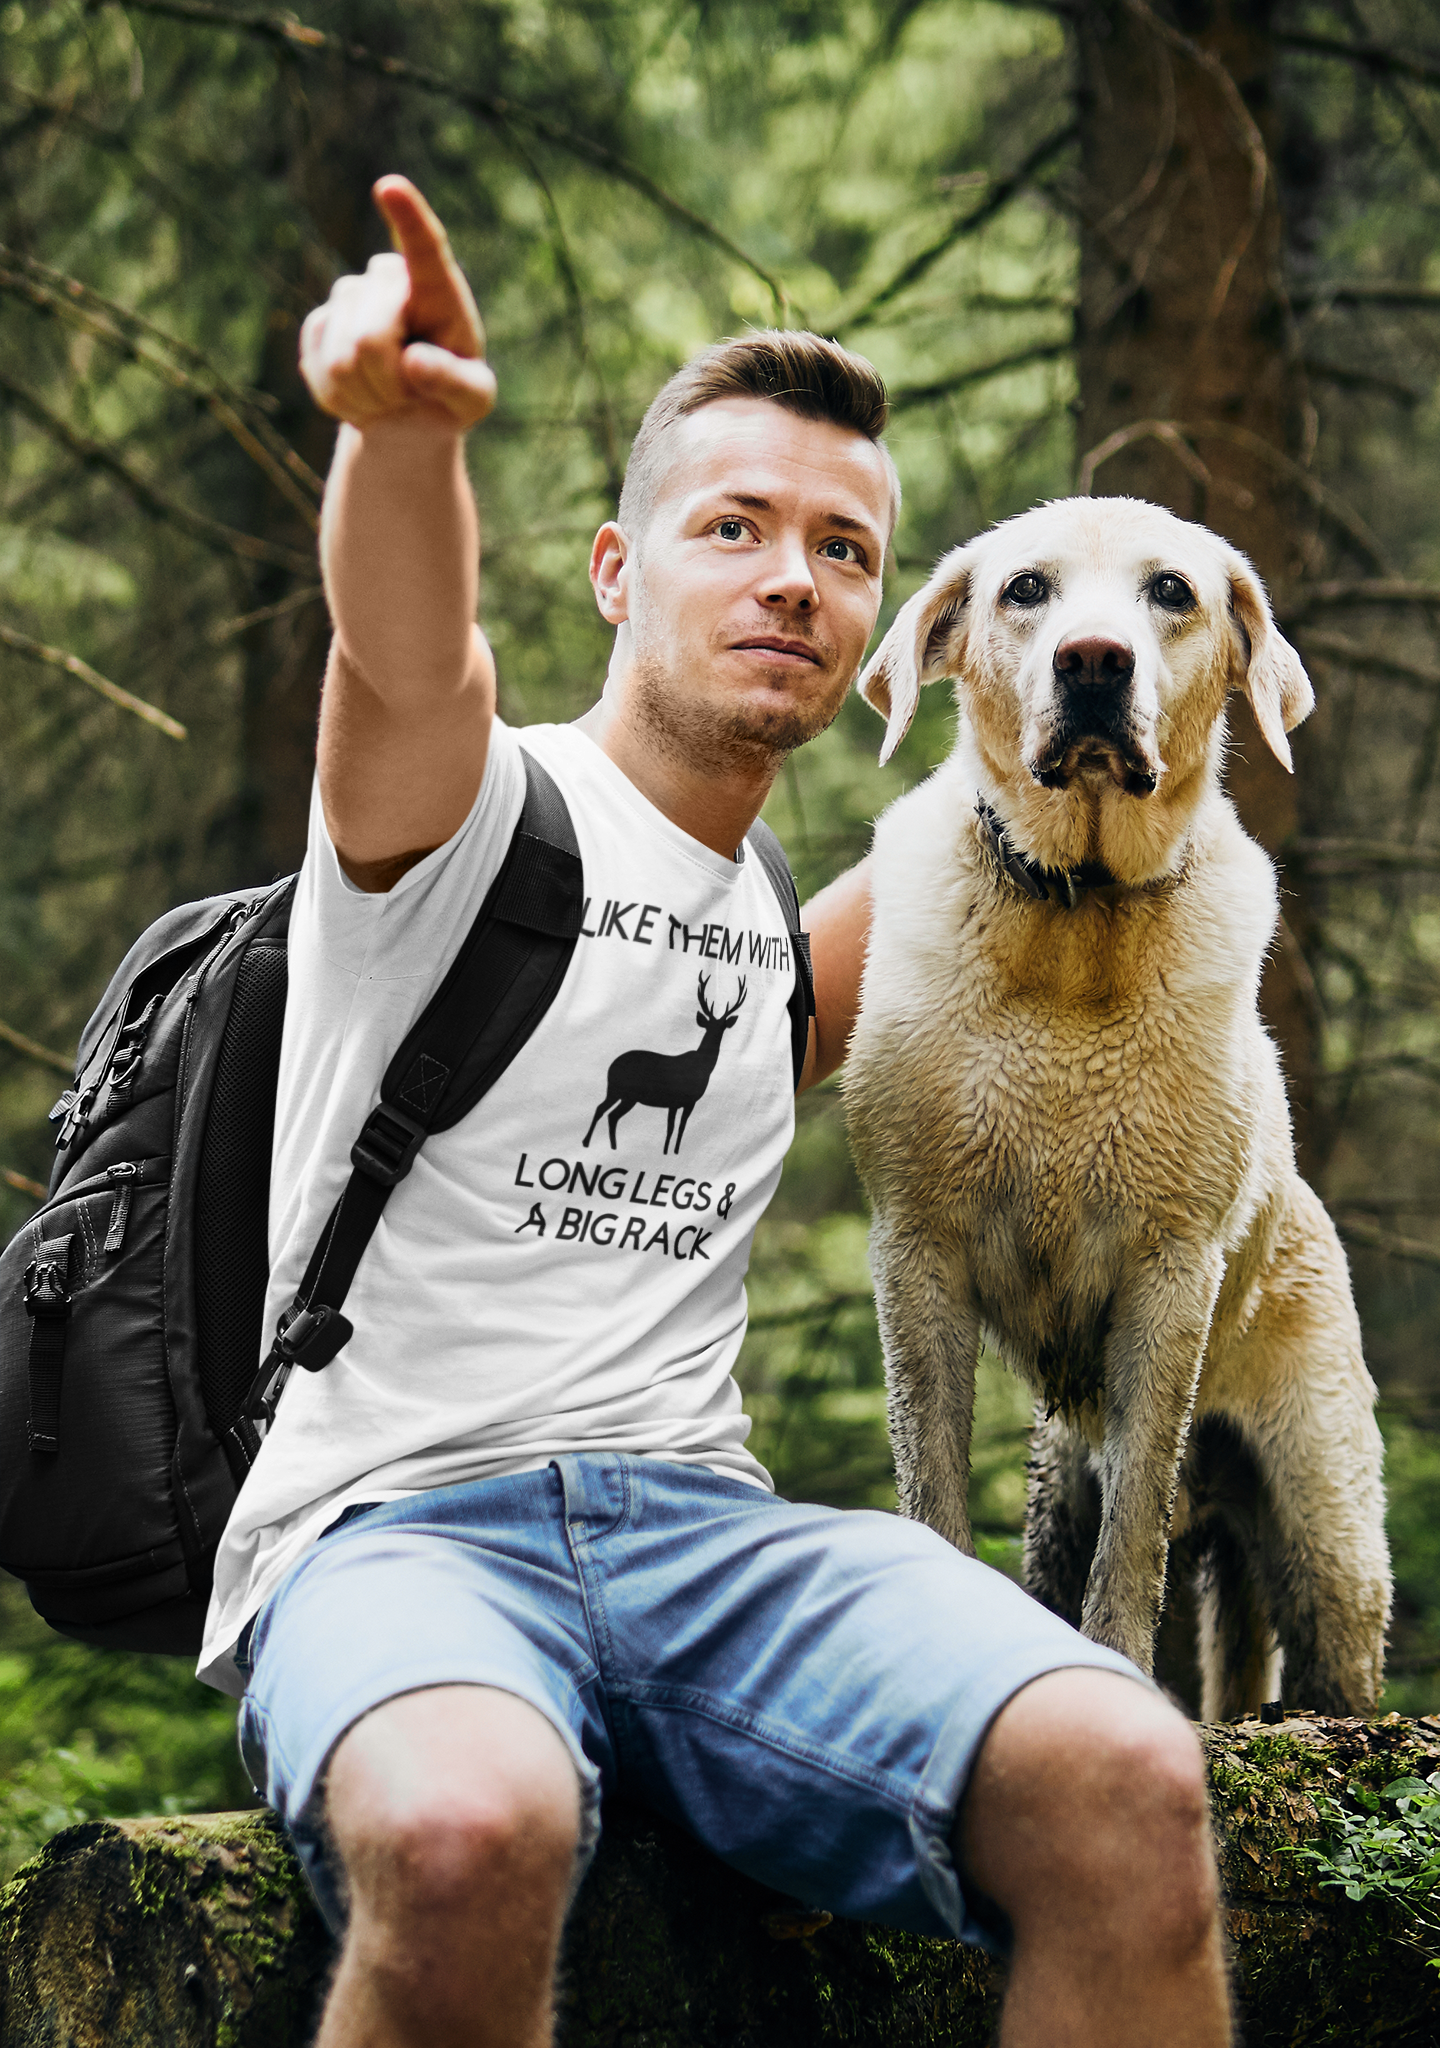 i-like-them-with-long-legs-and-a-big-rack-white-t-shirt-mockup-featuring-a-man-at-the-woods-with-his-dog